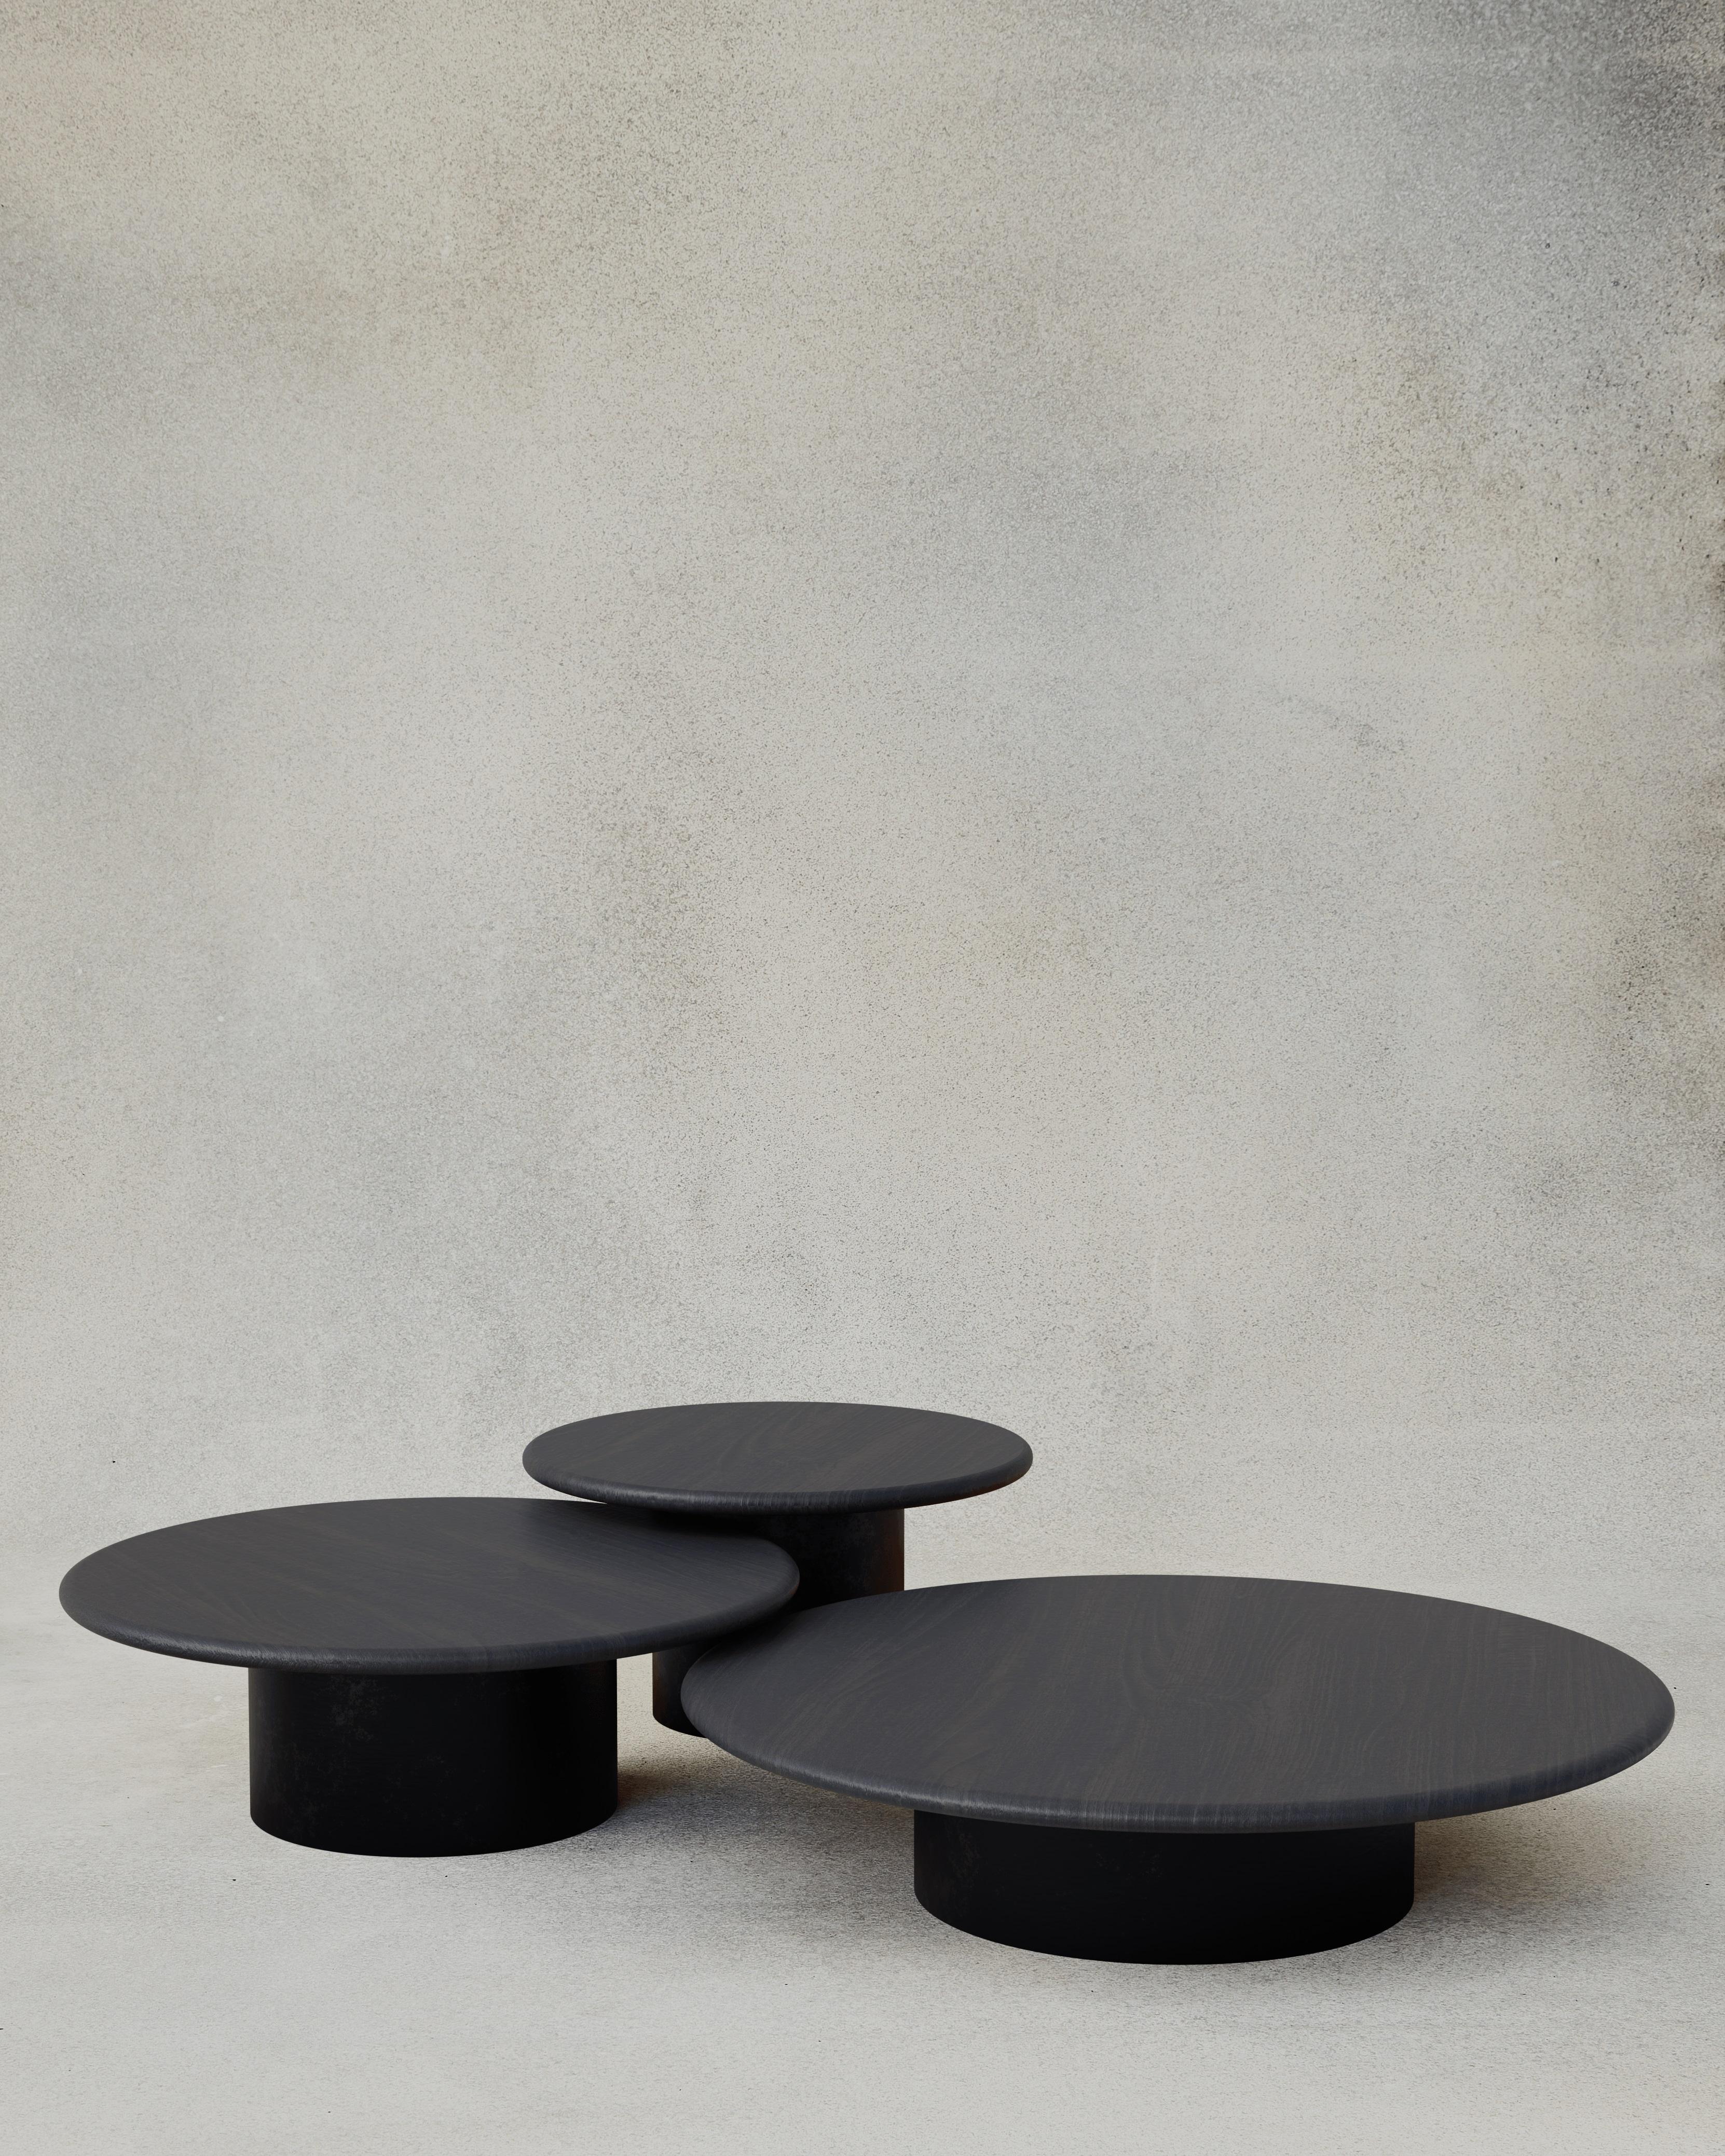 With their circular profiles, varying proportions and potential to be nested, these versatile tables evoke the pattern of raindrops in a pool of water when placed together.

Bought as a set of 600, 800, 1000, we add a 10% discount

Tops: Black